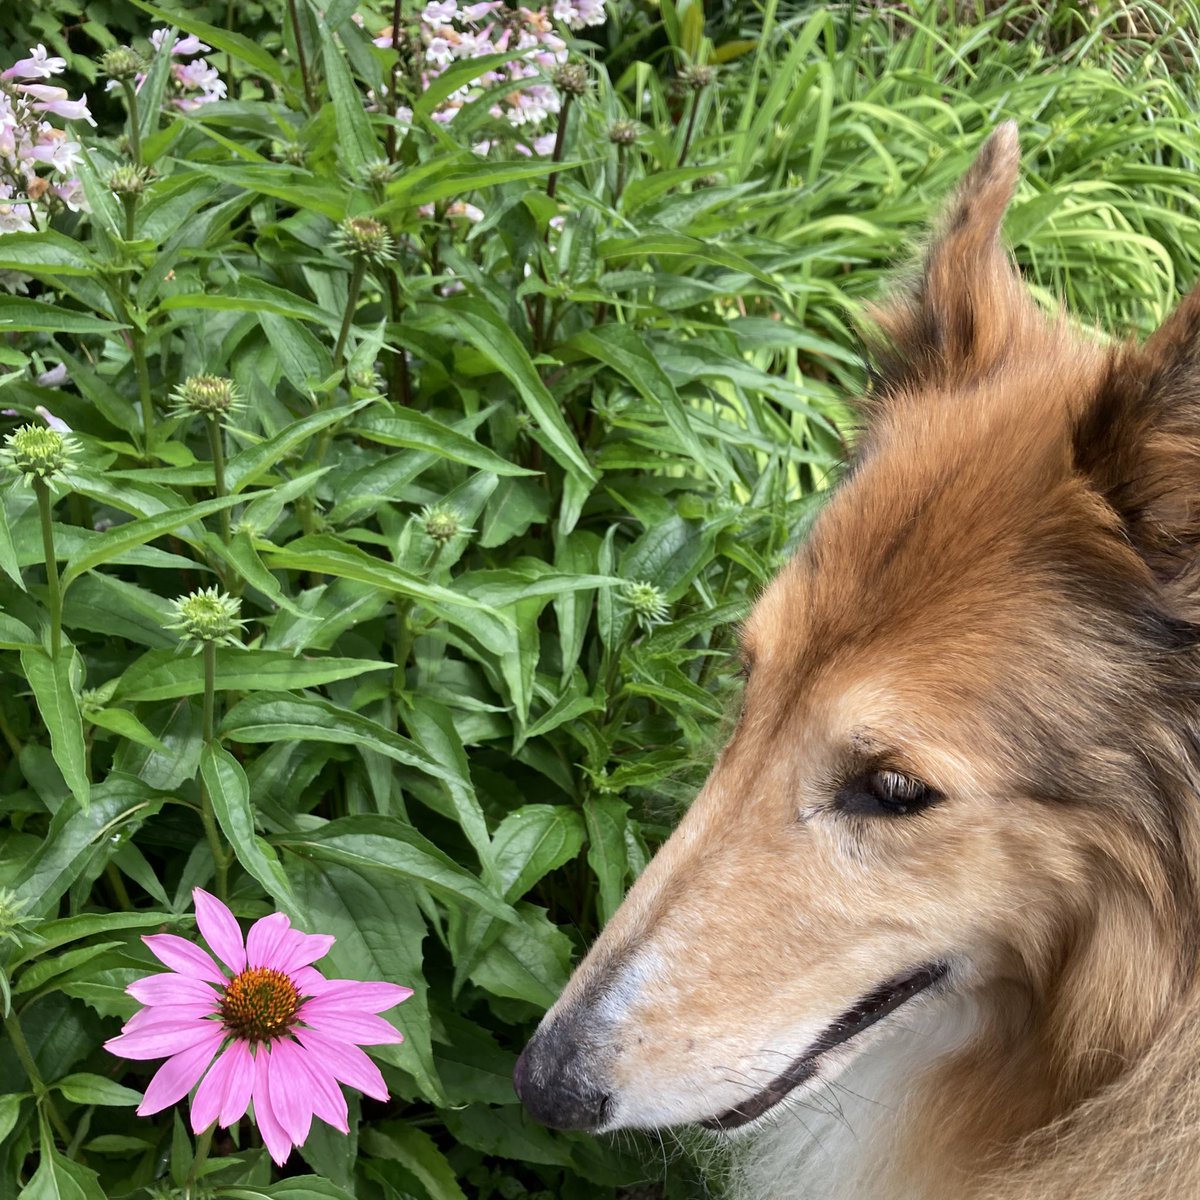 The #collieflower found the first #coneflower of the season. 🌼

#roughcollie #dogsandflowers #coneflowers #aftertherain #MayFlowers #aprilshowersbringmayflowers #collie